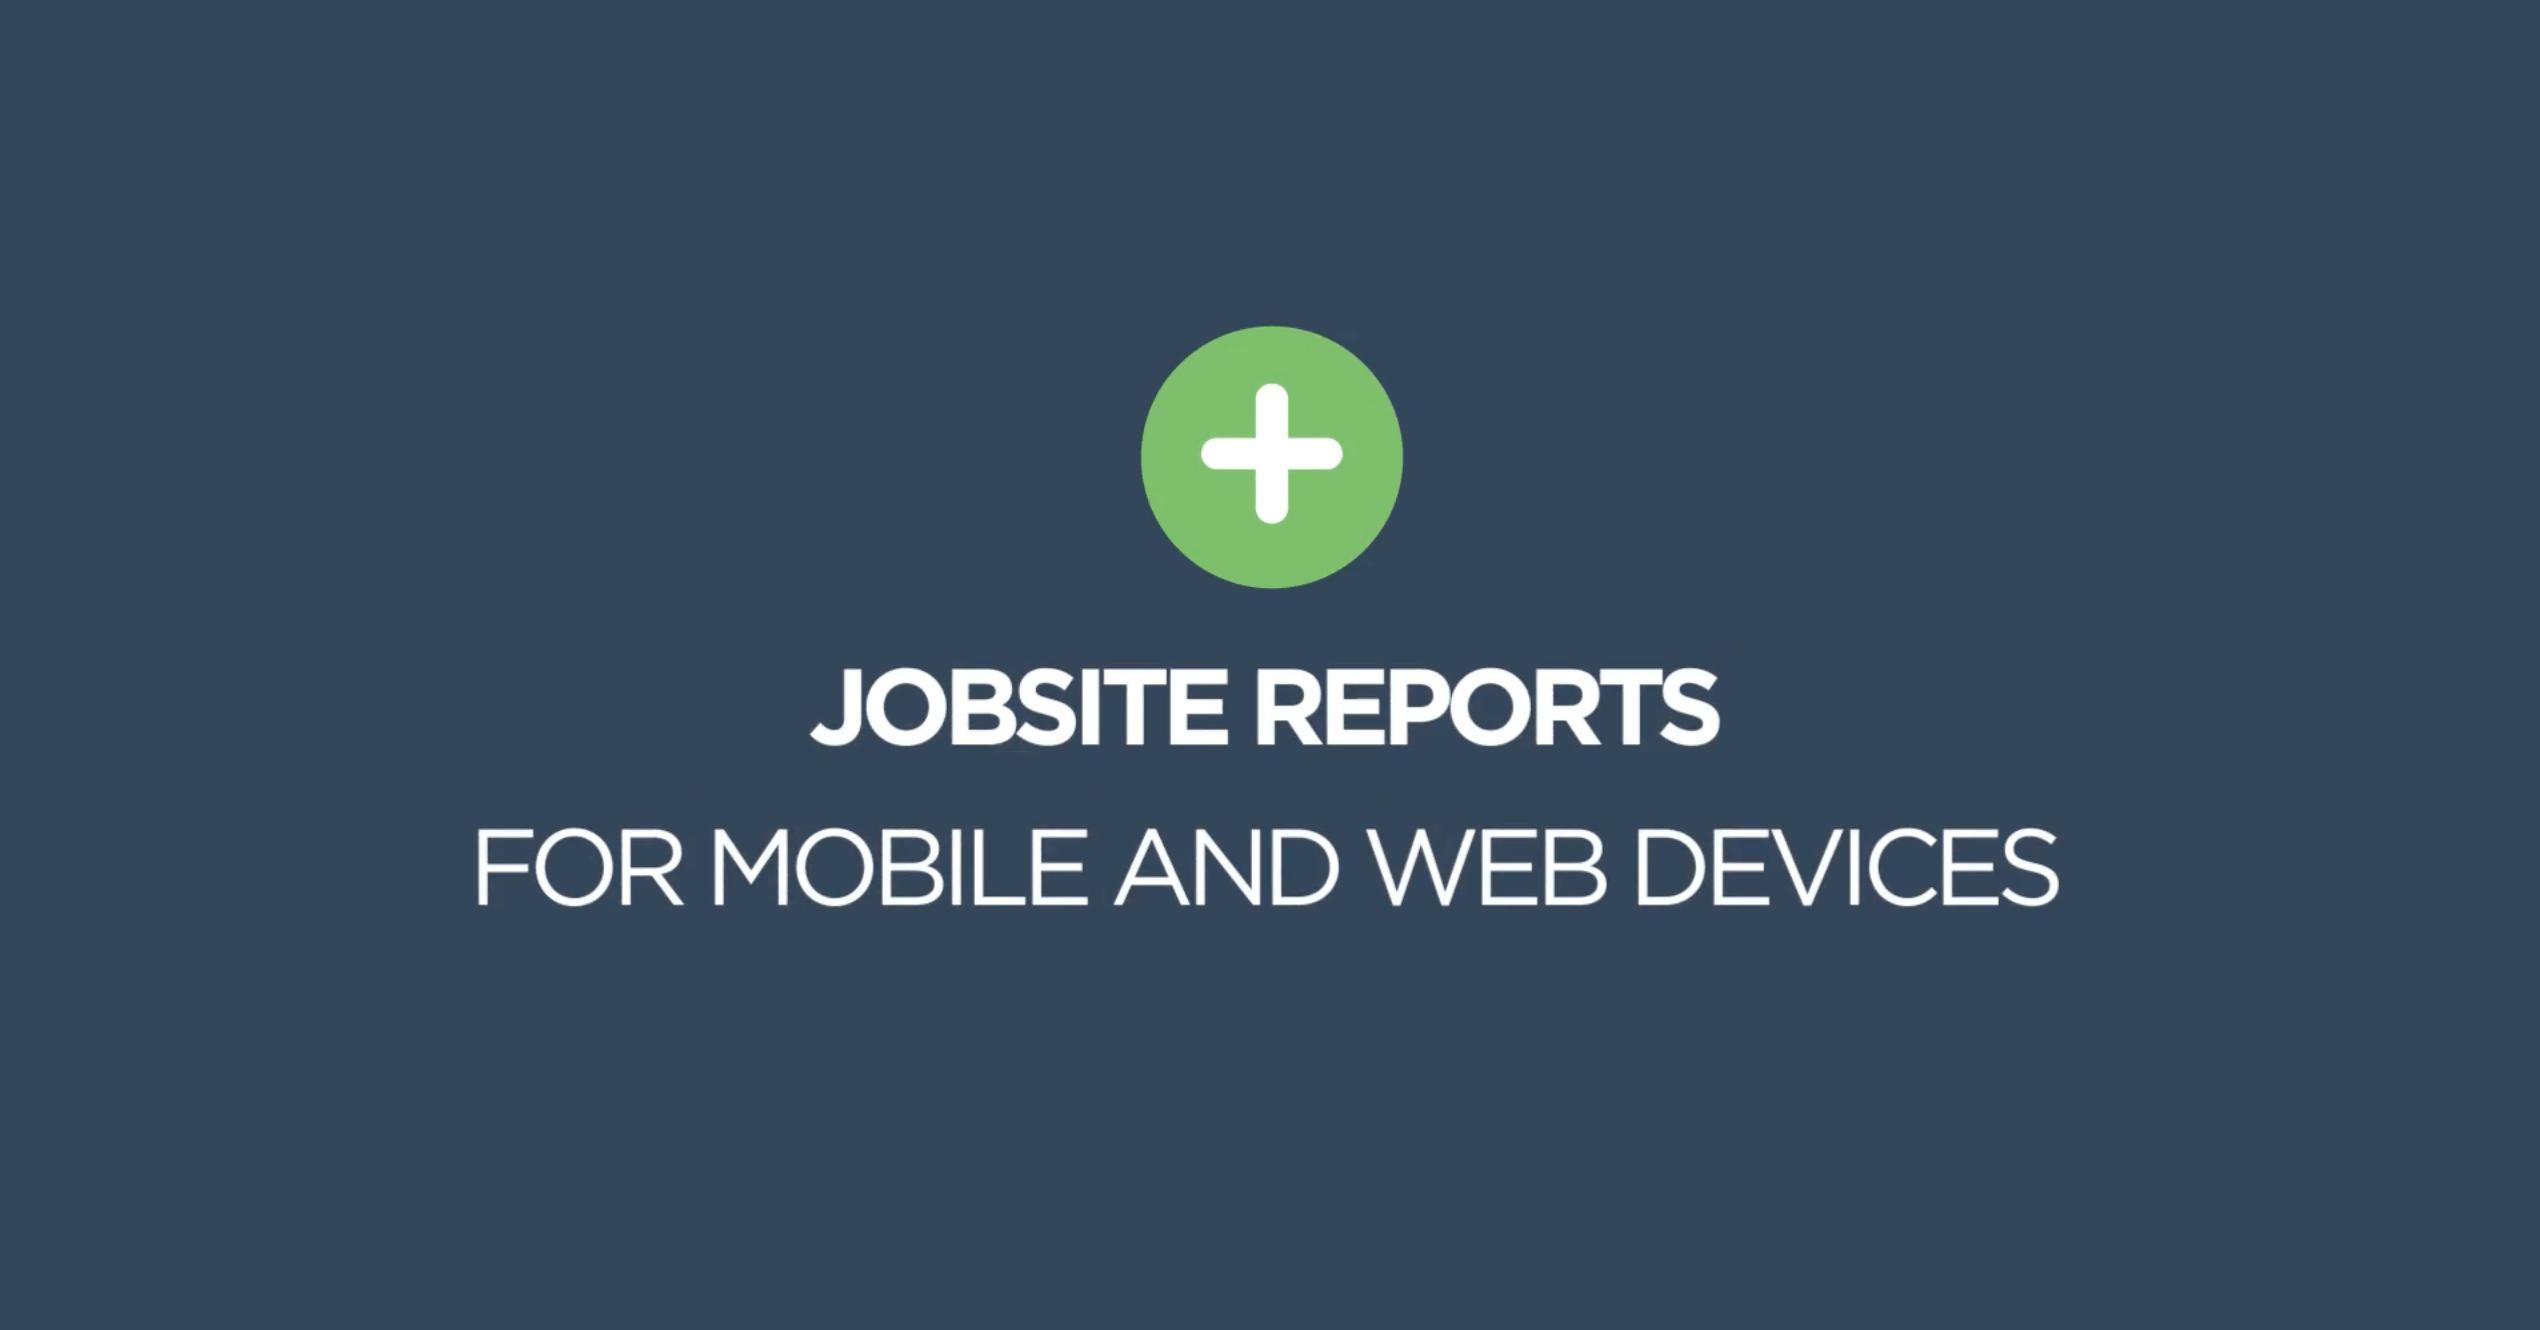 jobsite reports for mobile and web devices from busybusy